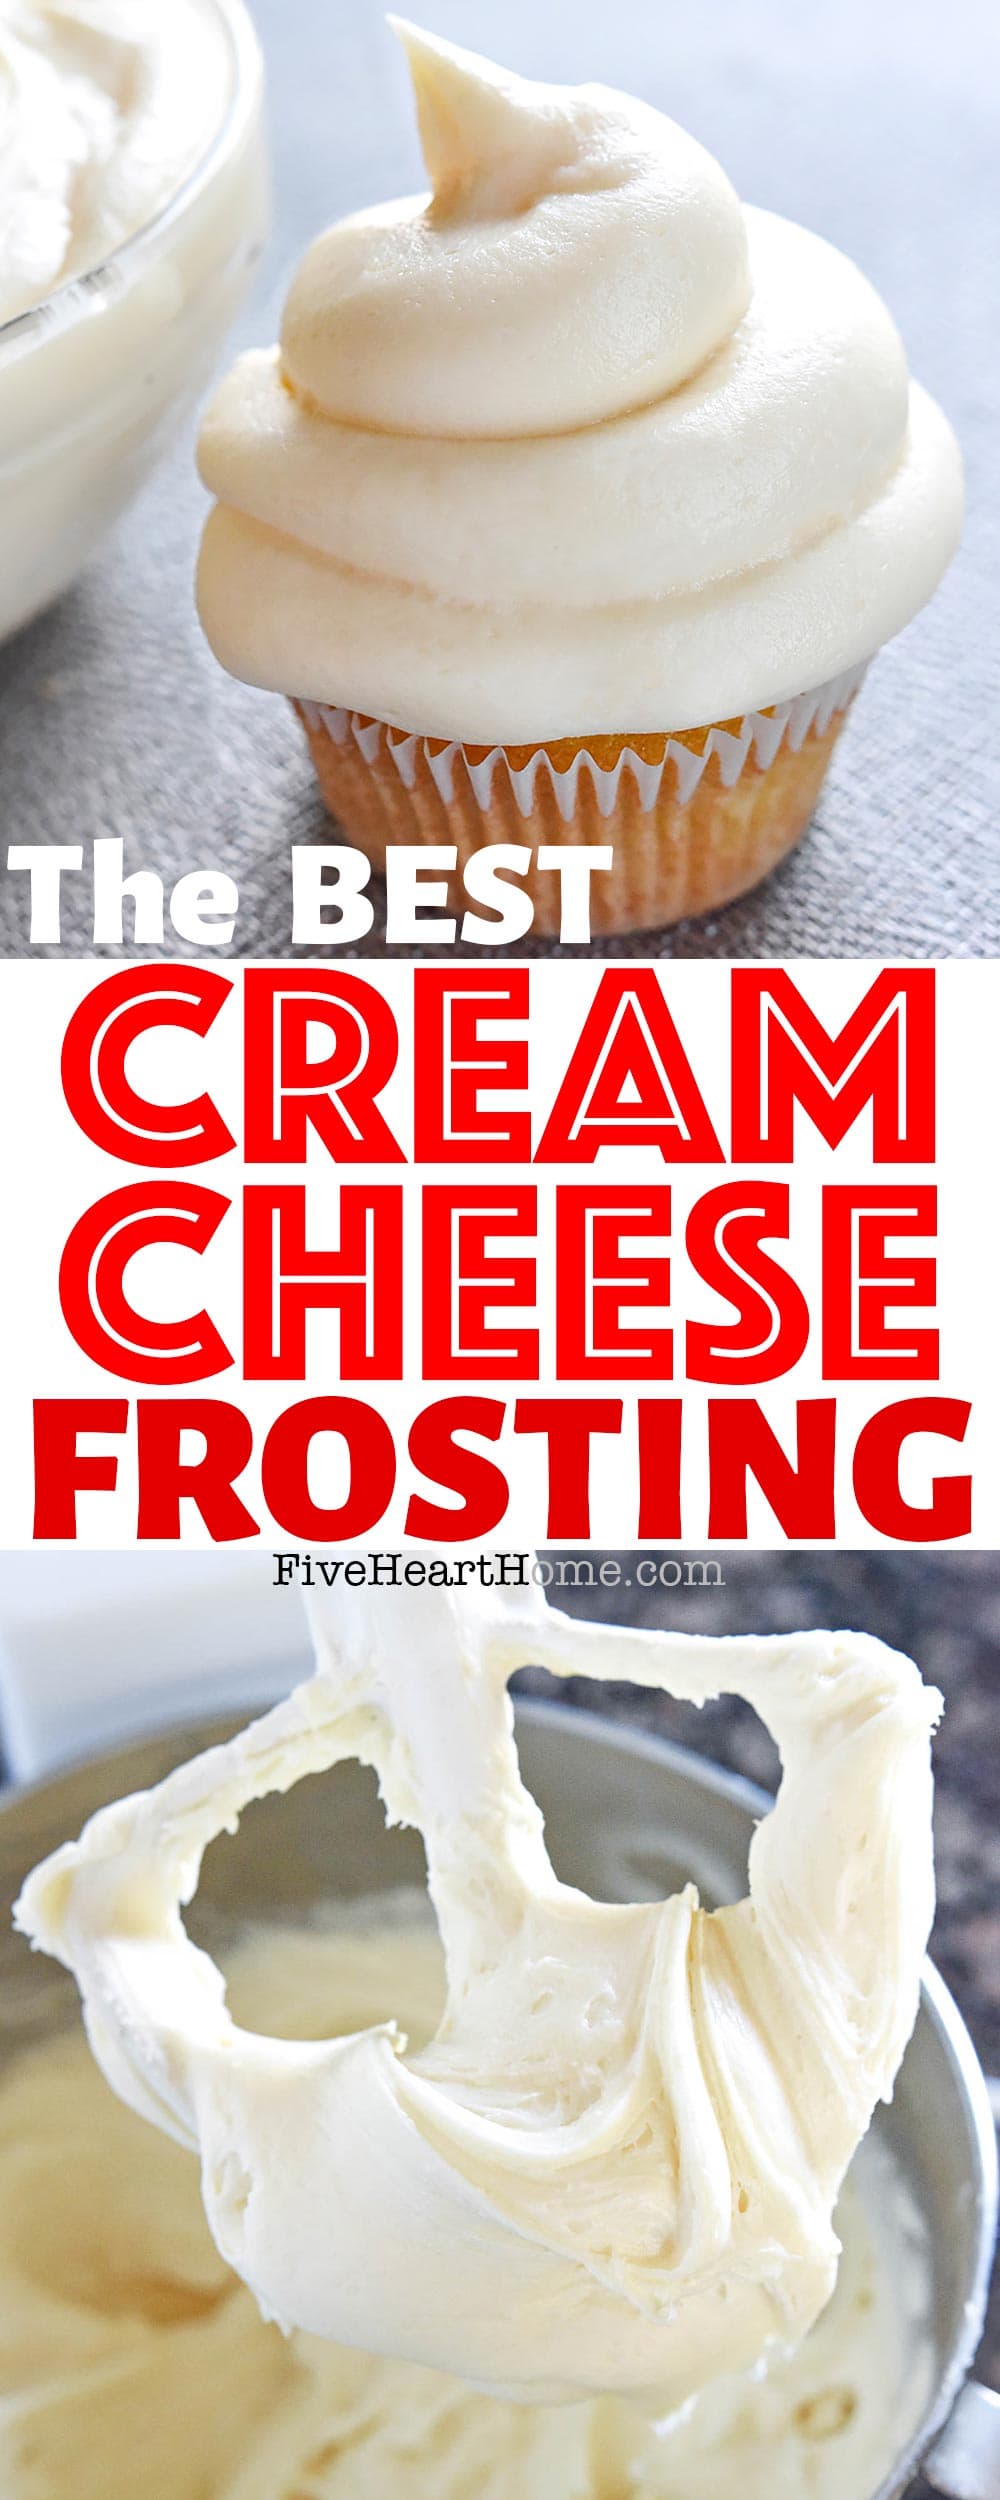 Cream Cheese Frosting ~ quick and easy to make in a matter of minutes with just FOUR simple ingredients. Versatile enough to use on a variety of cakes, cupcakes, and desserts, this cream cheese frosting recipe is truly the BEST! | FiveHeartHome.com via @fivehearthome